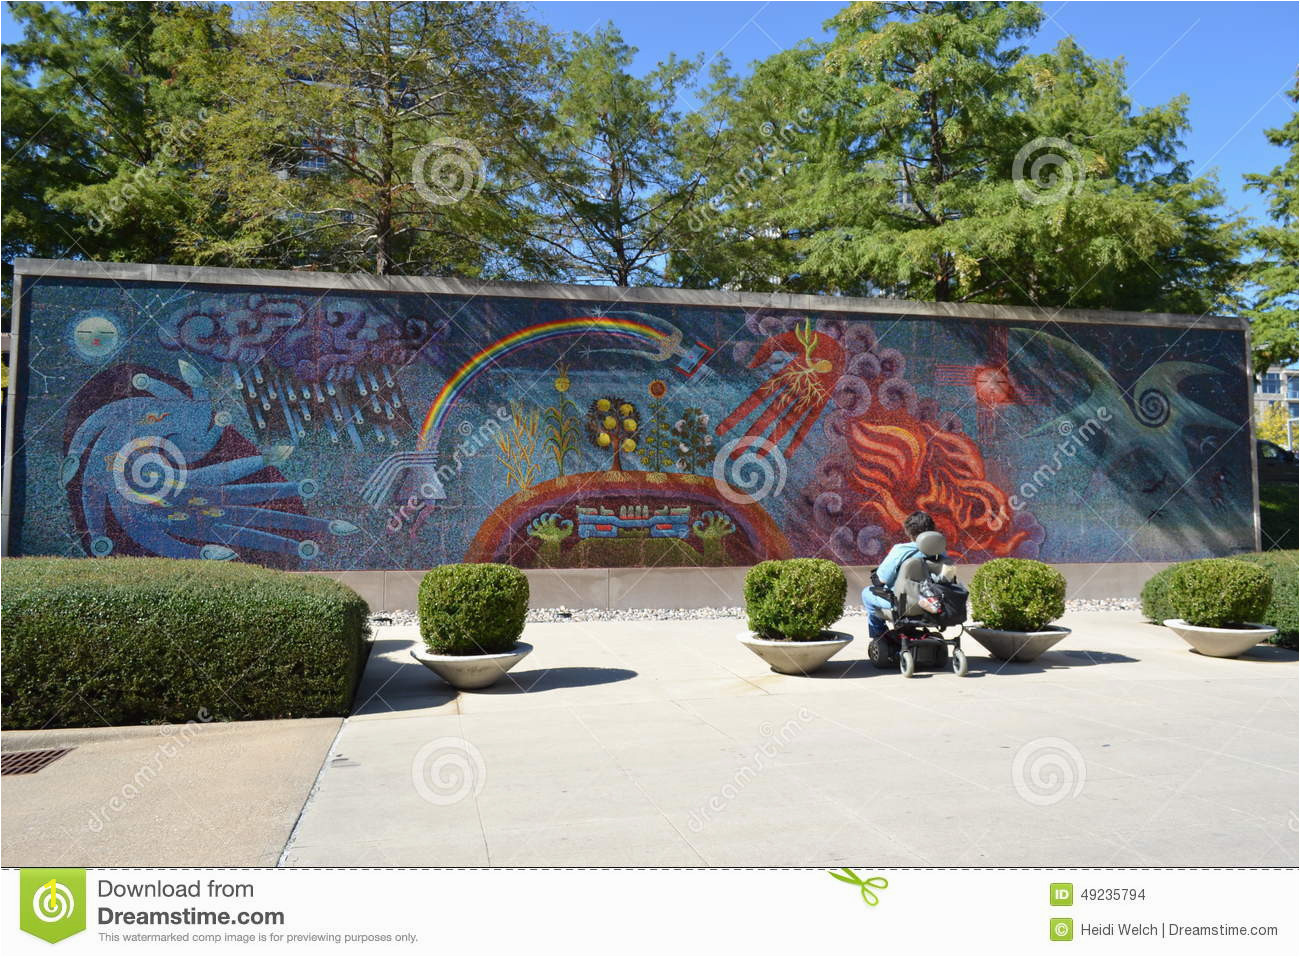 How to Paint A Wall Mural Outside Full Wall Mural Editorial Stock Image Image Of Wall